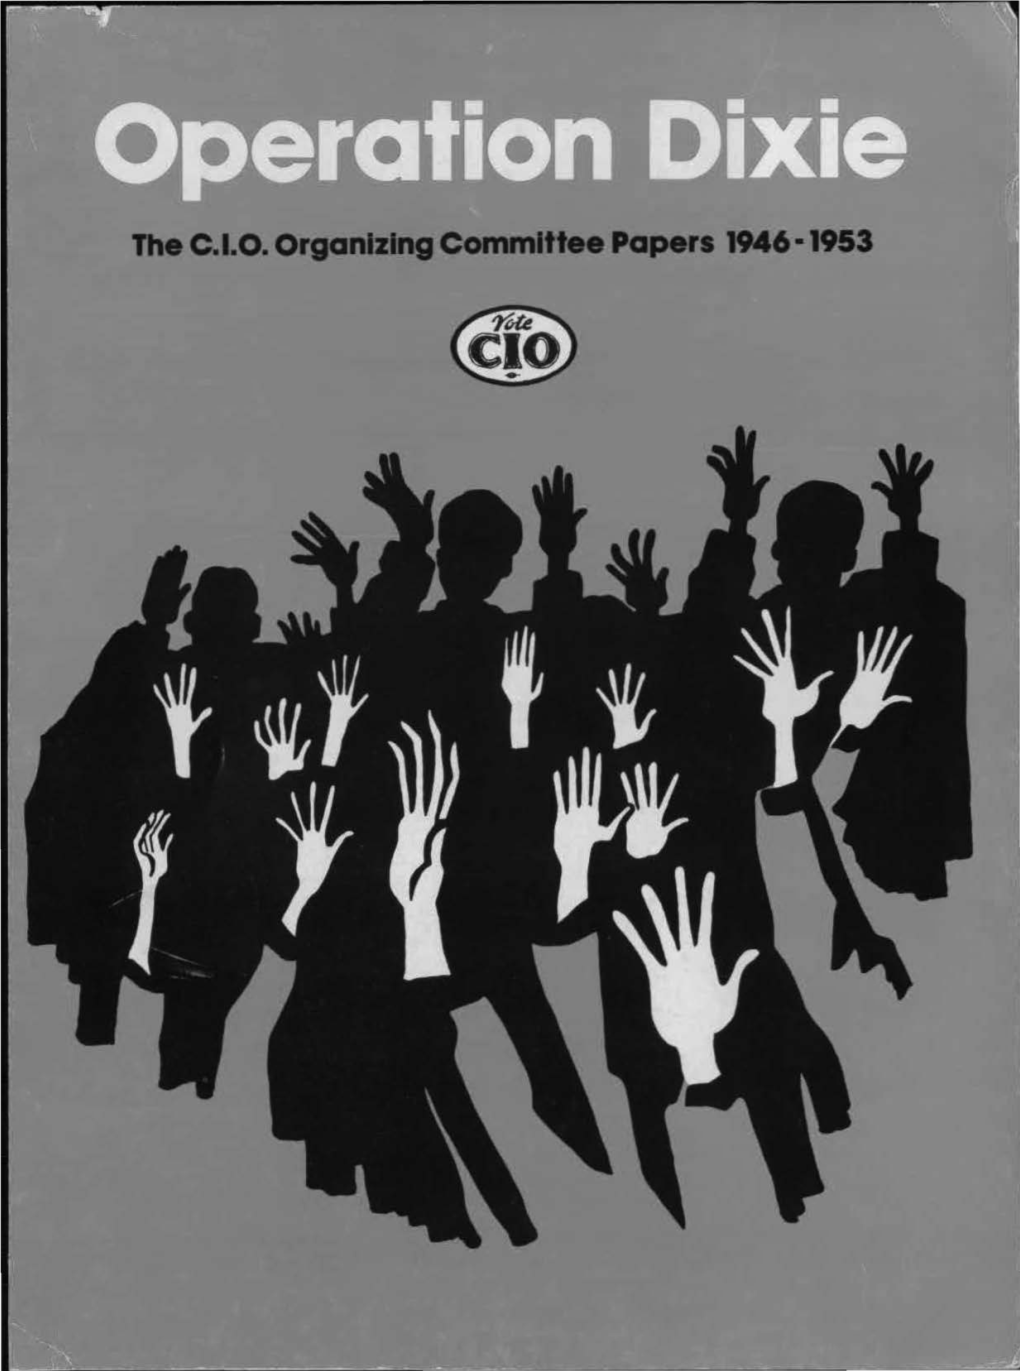 The C.1.0. Organizing Committee Papers 1946· 1953 Pro Uesf ----- Start Here